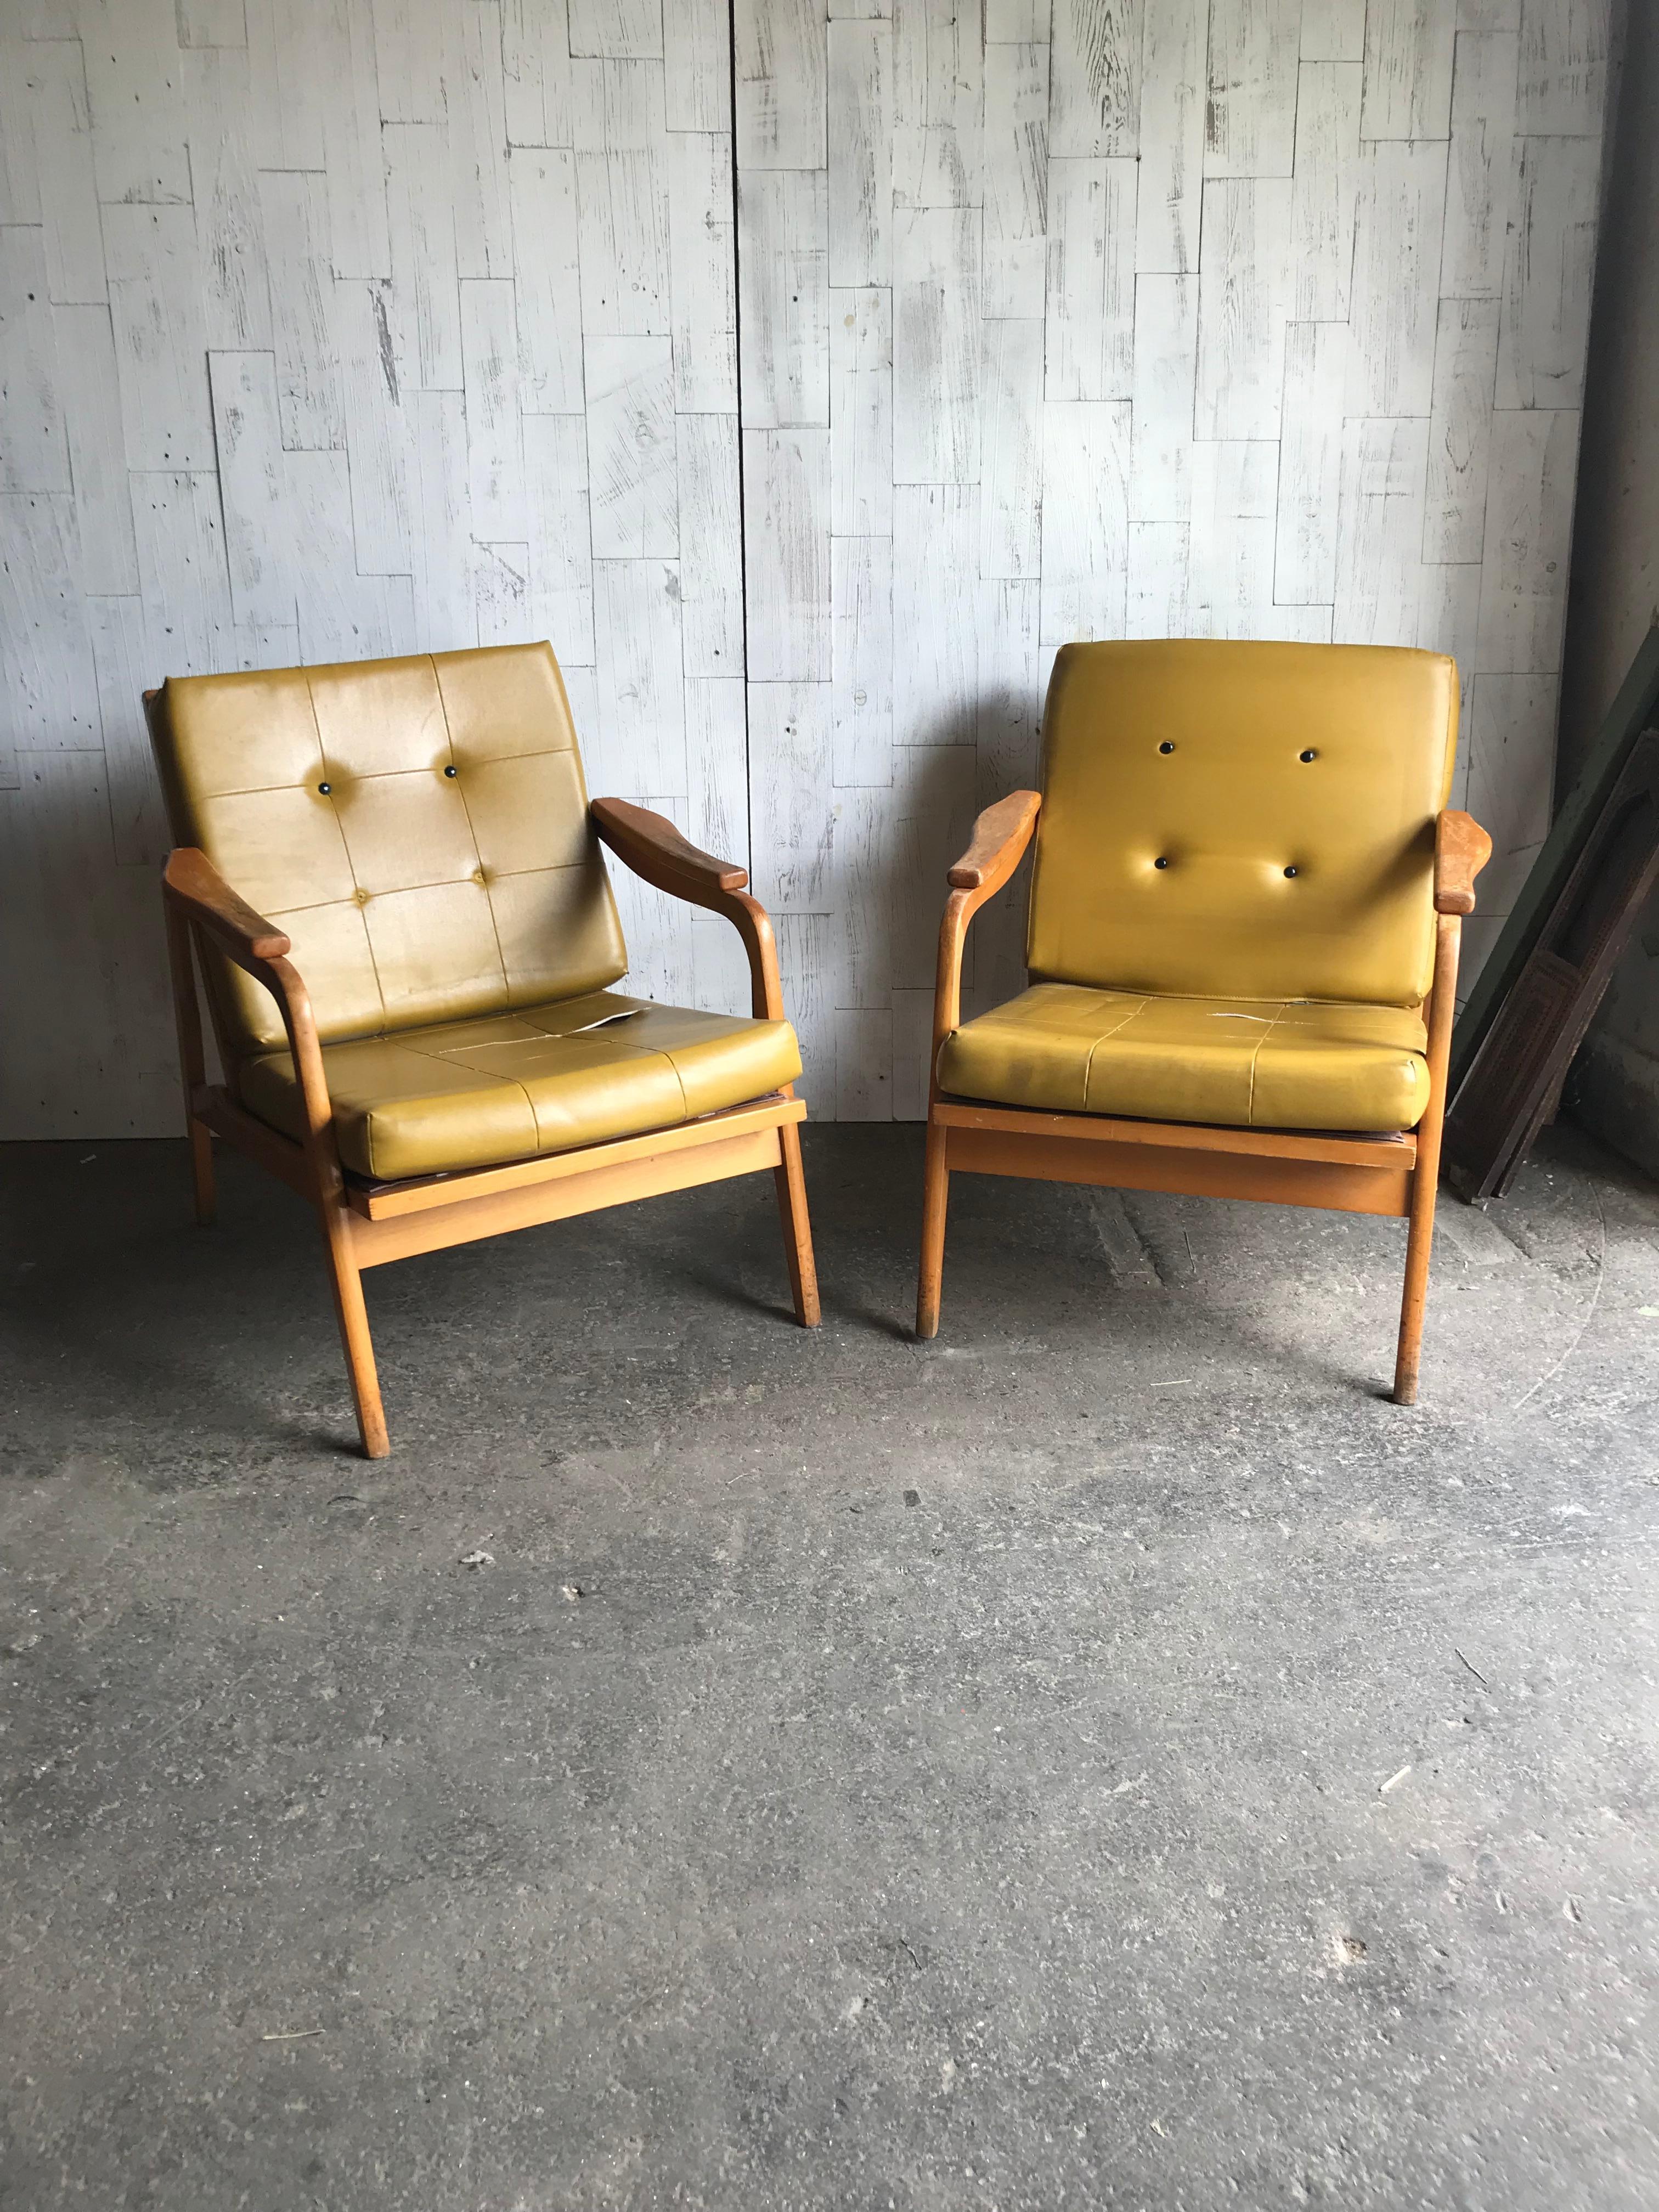 Midcentury Danish style wooden lounge armchairs, 1960s
Size :67x70x77 H
 The price includes the renovation :)))

Needs to be upholstered
The chairs structure is in fair condition- upholstery is suitable for the renovation.
If you are